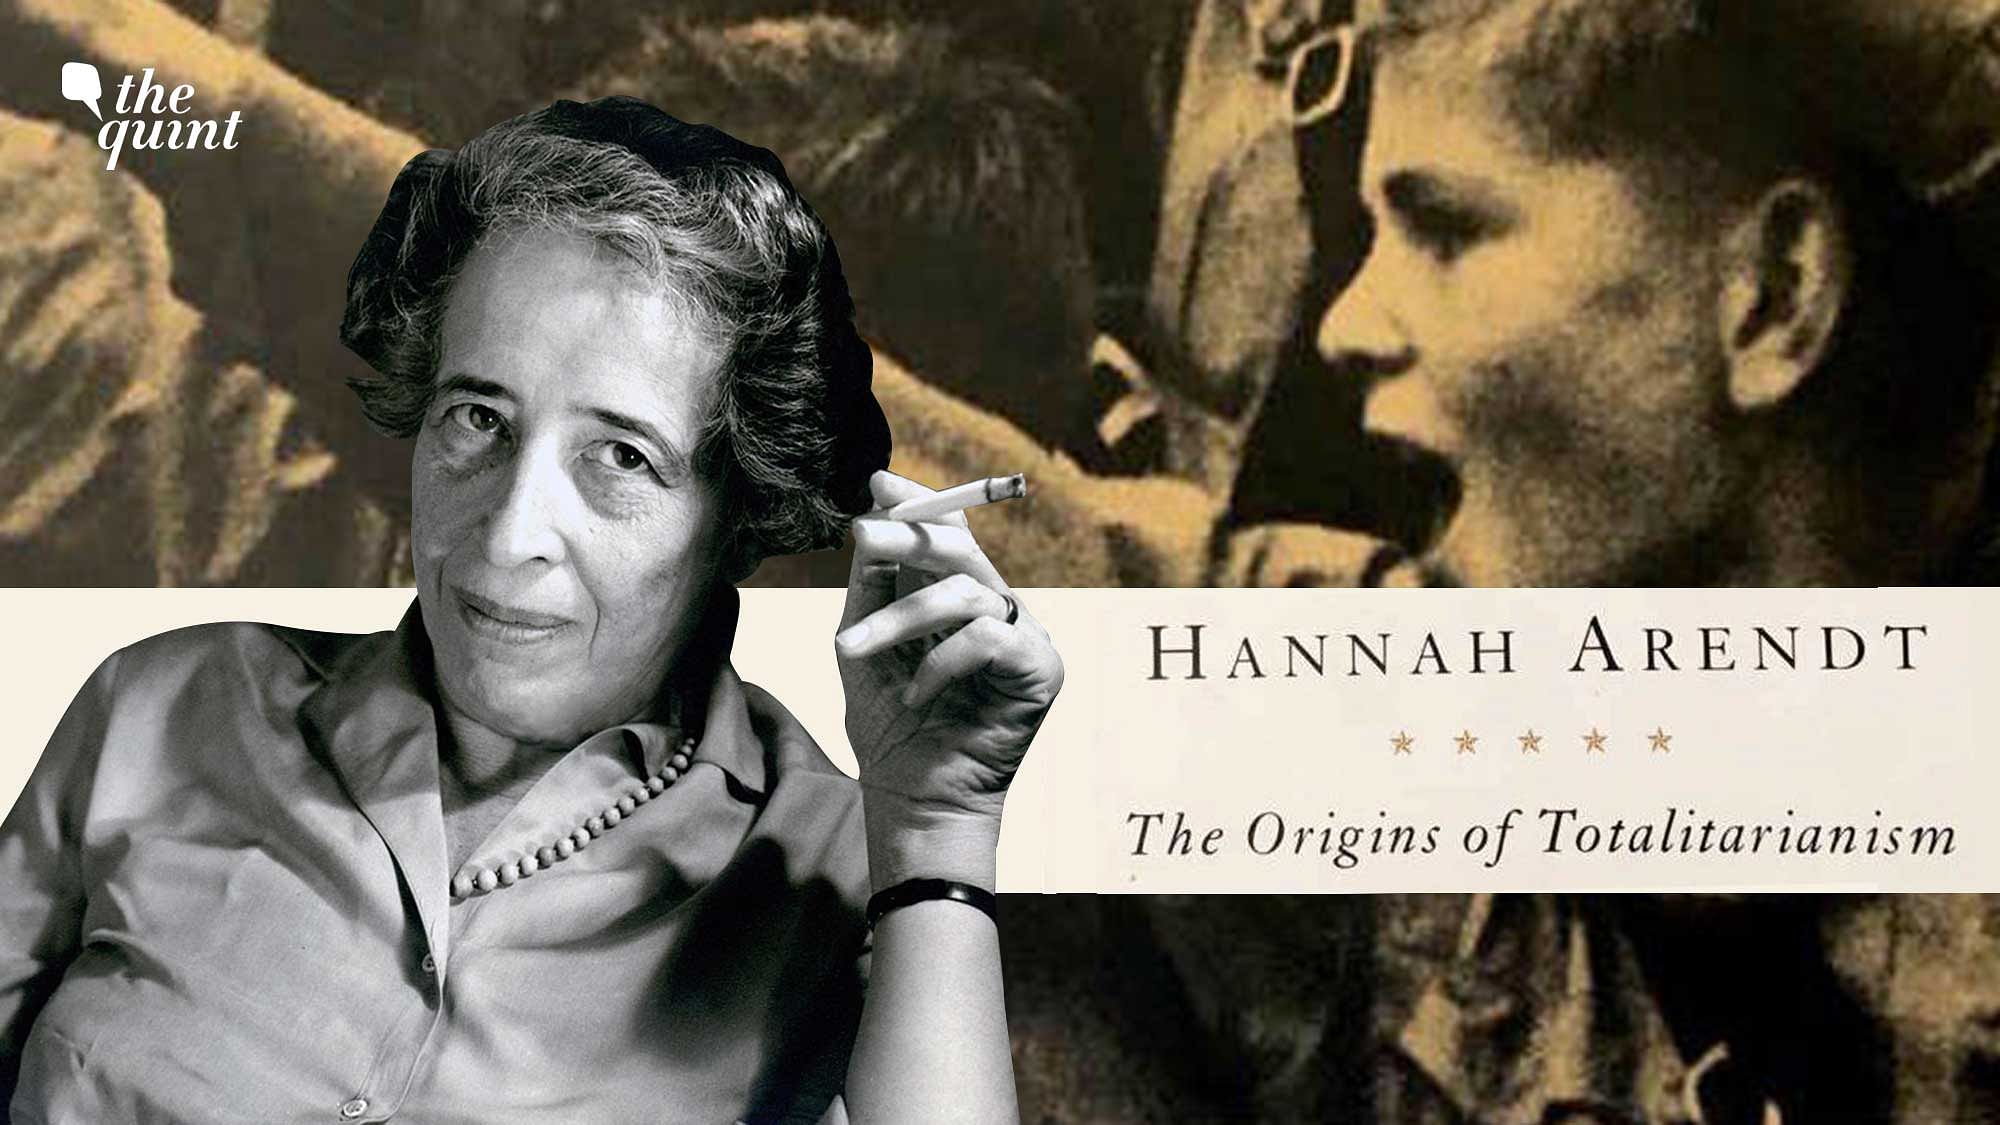 <div class="paragraphs"><p>One of Hannah Arendt's most famous works is&nbsp;<em>The Origins of Totalitarianism,&nbsp;</em>published in 1951.&nbsp;</p></div>